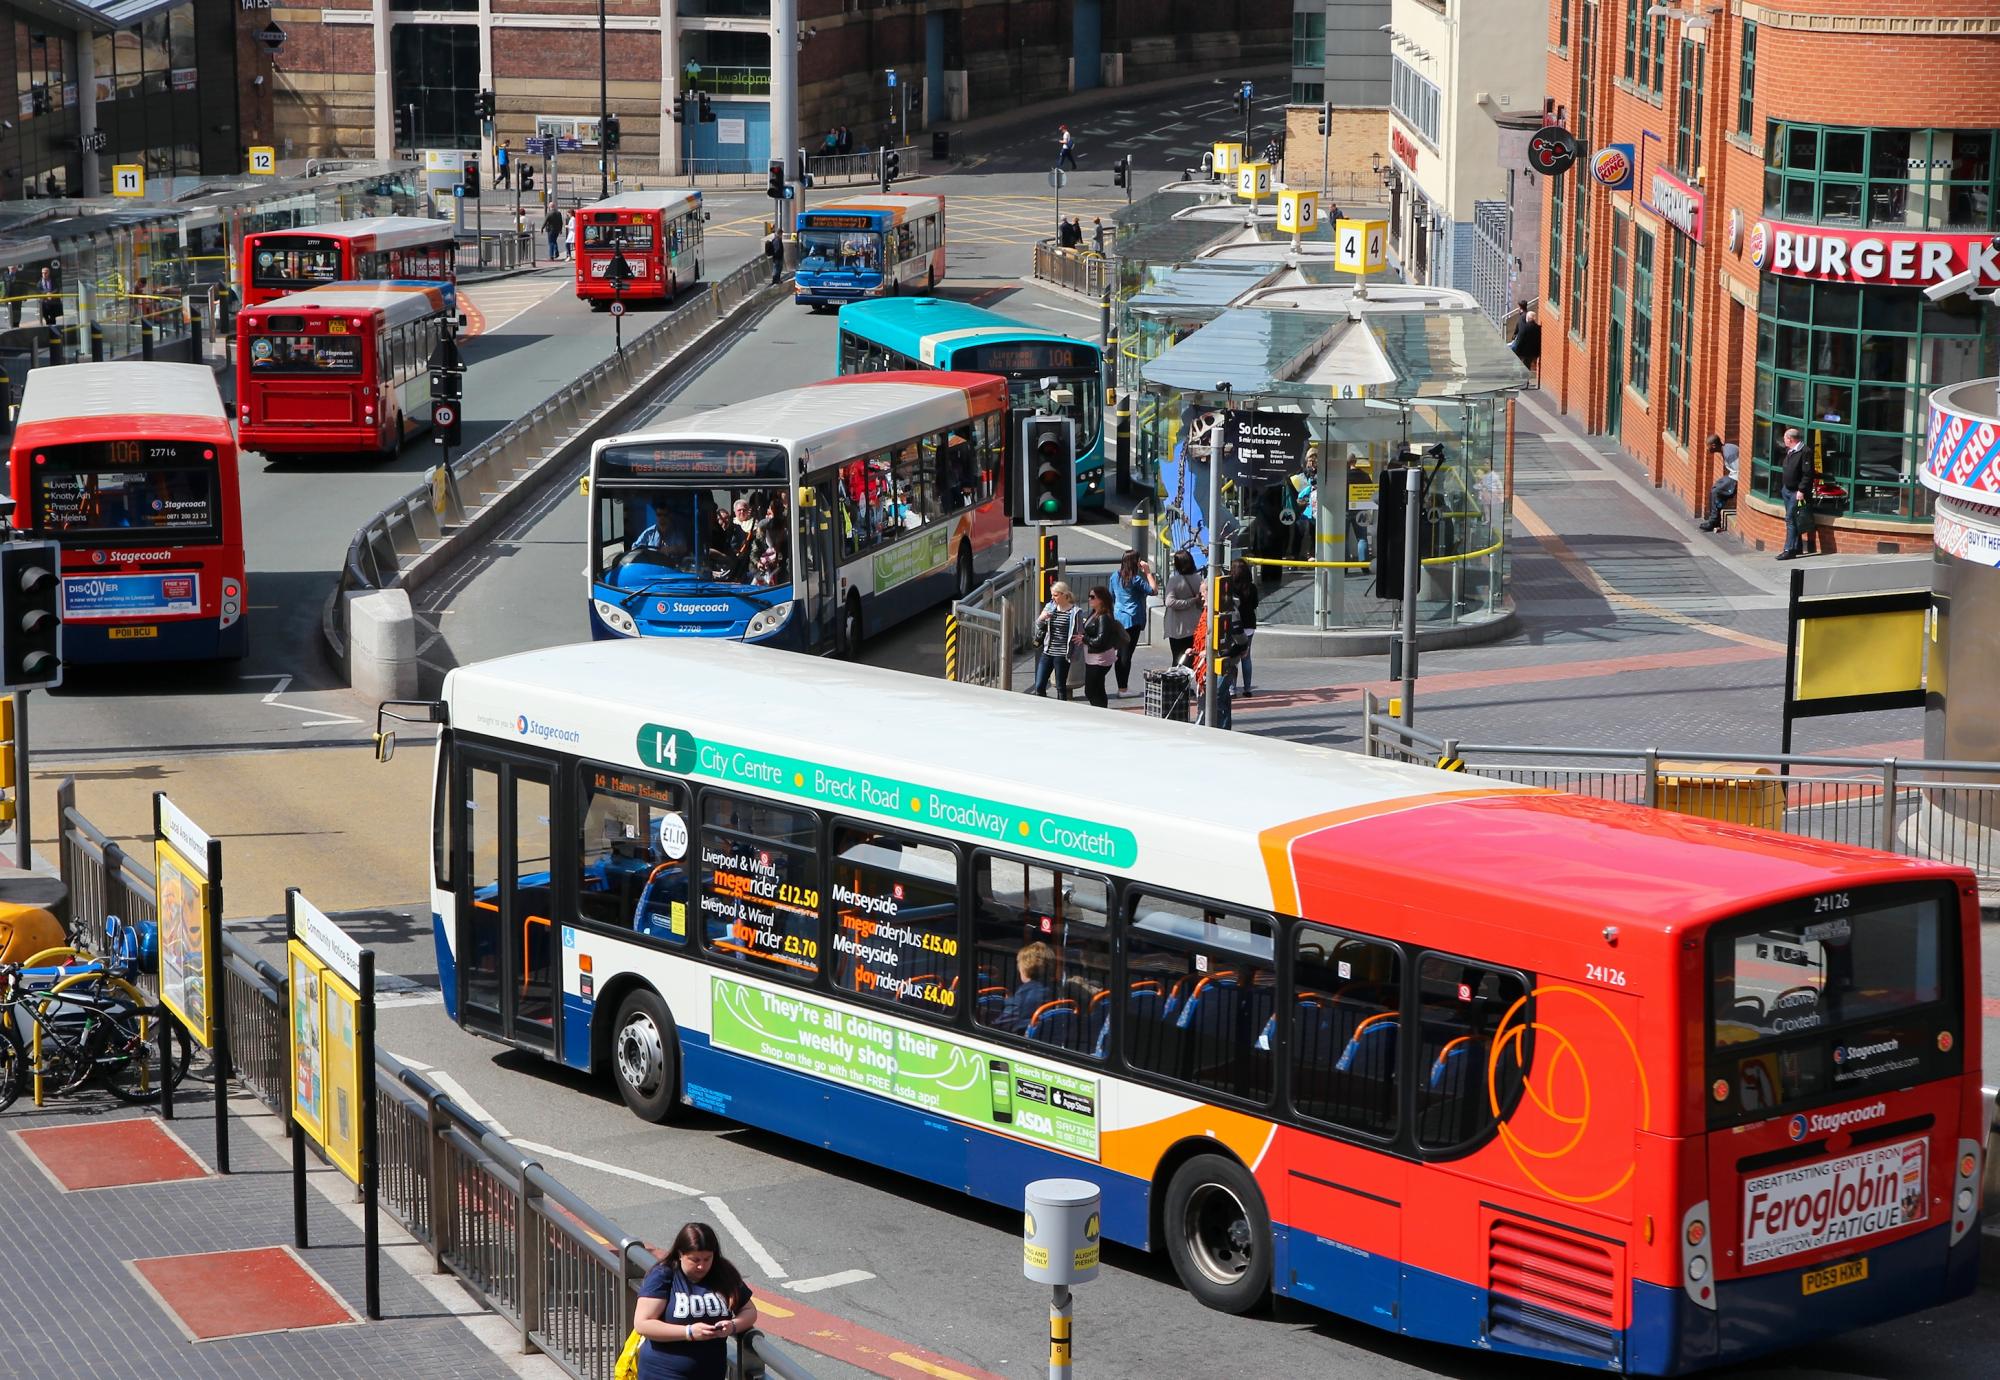 People ride StageCoach buses on in Liverpool, UK.